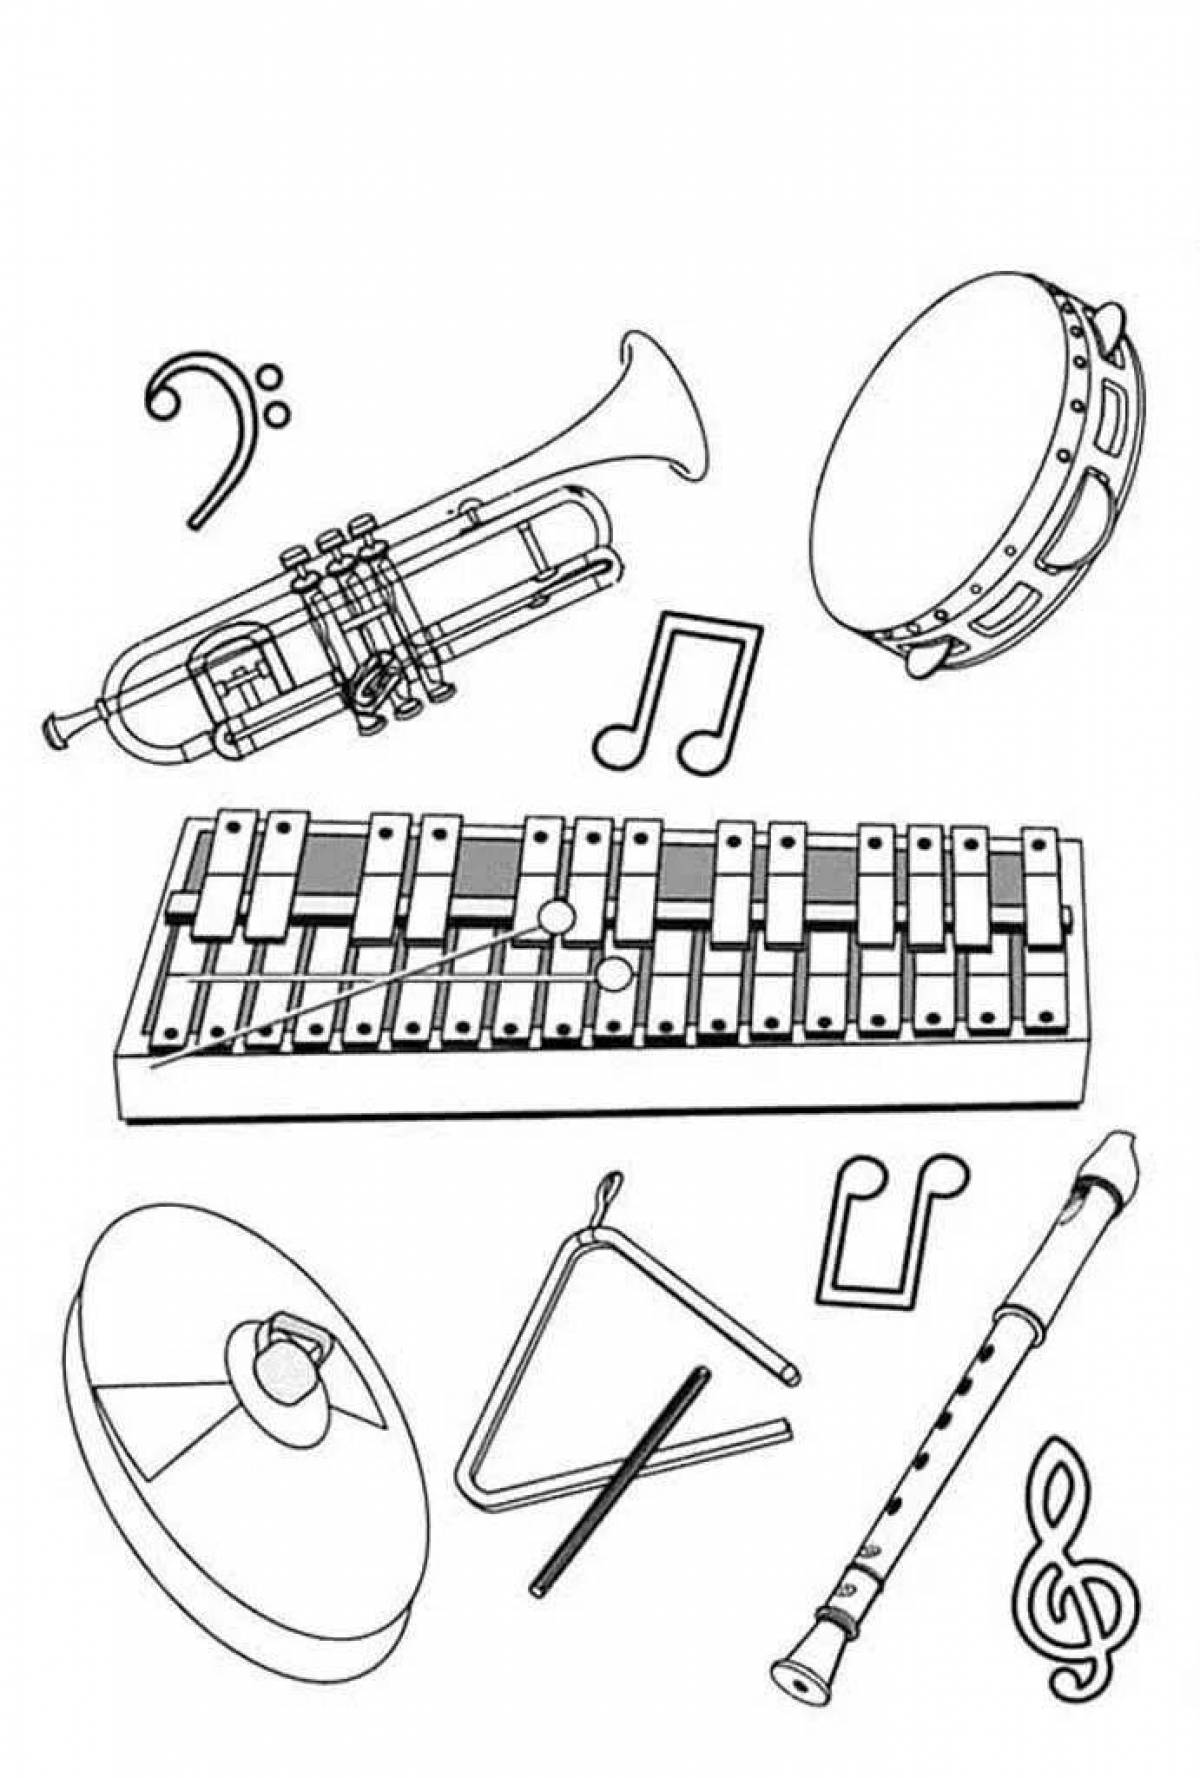 Colorful musical instruments coloring pages for kids